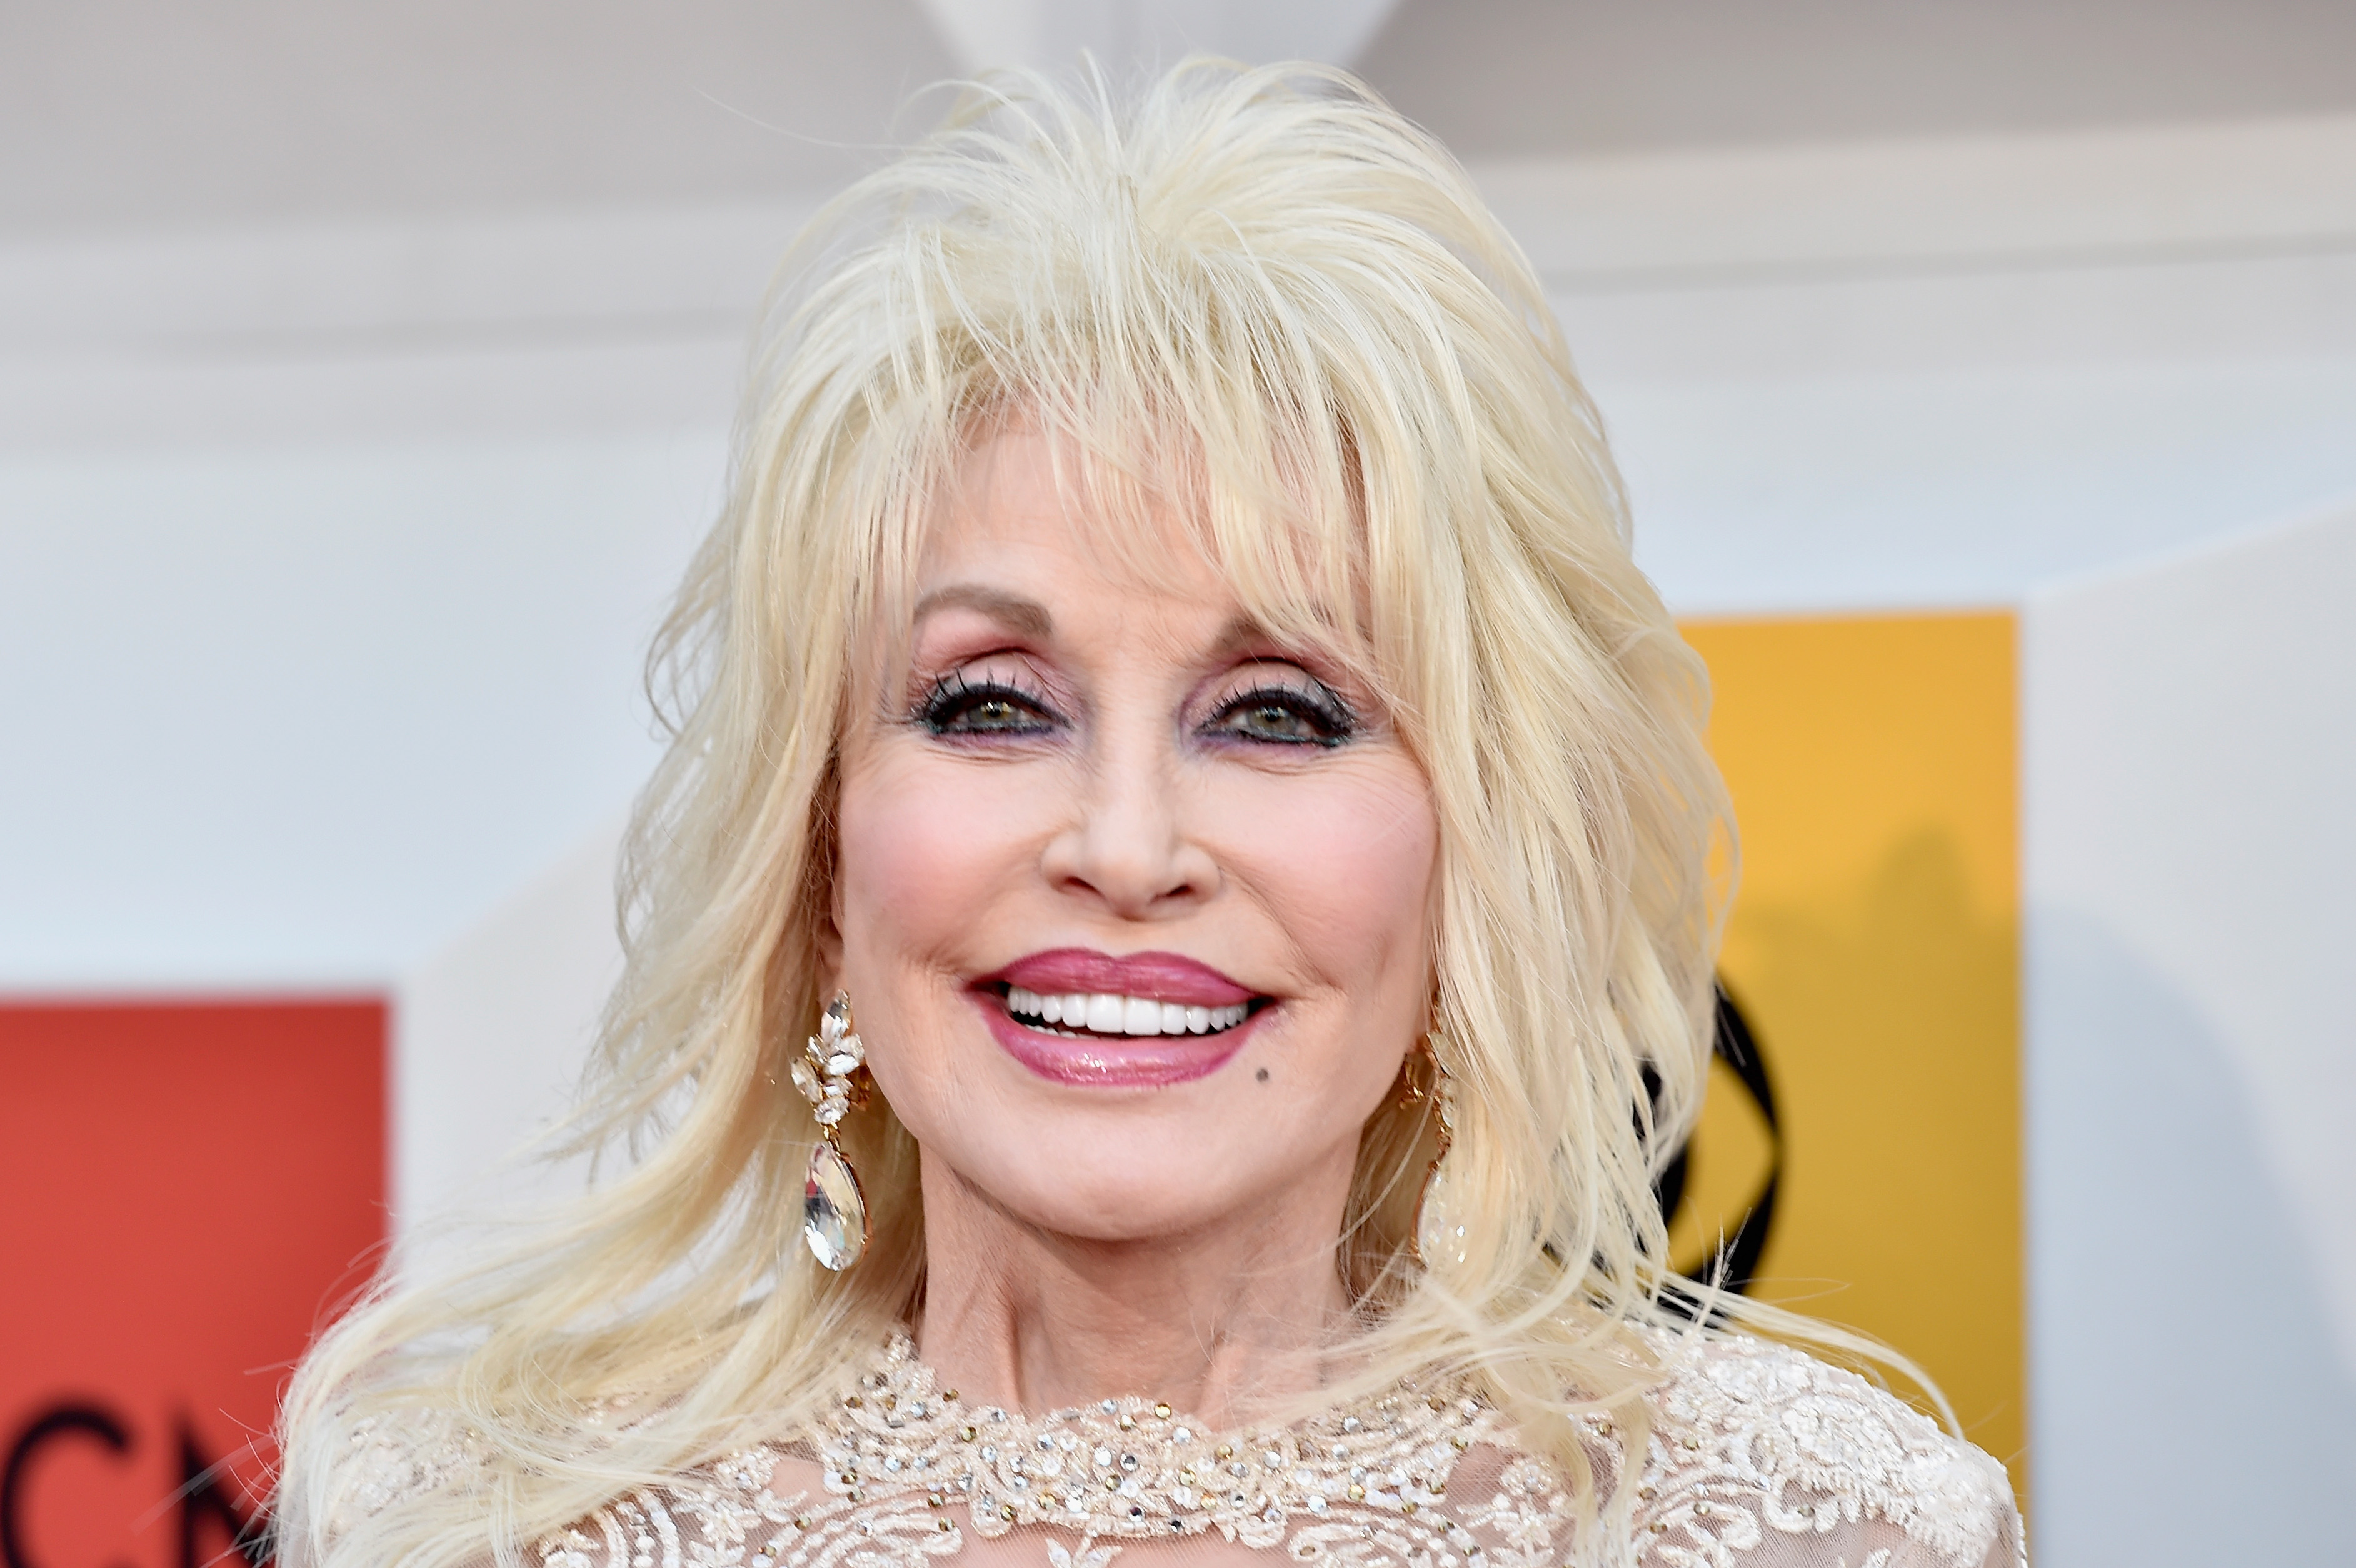 Dolly Parton wearing a white embroidered top and earrings in front of a red and yellow background.